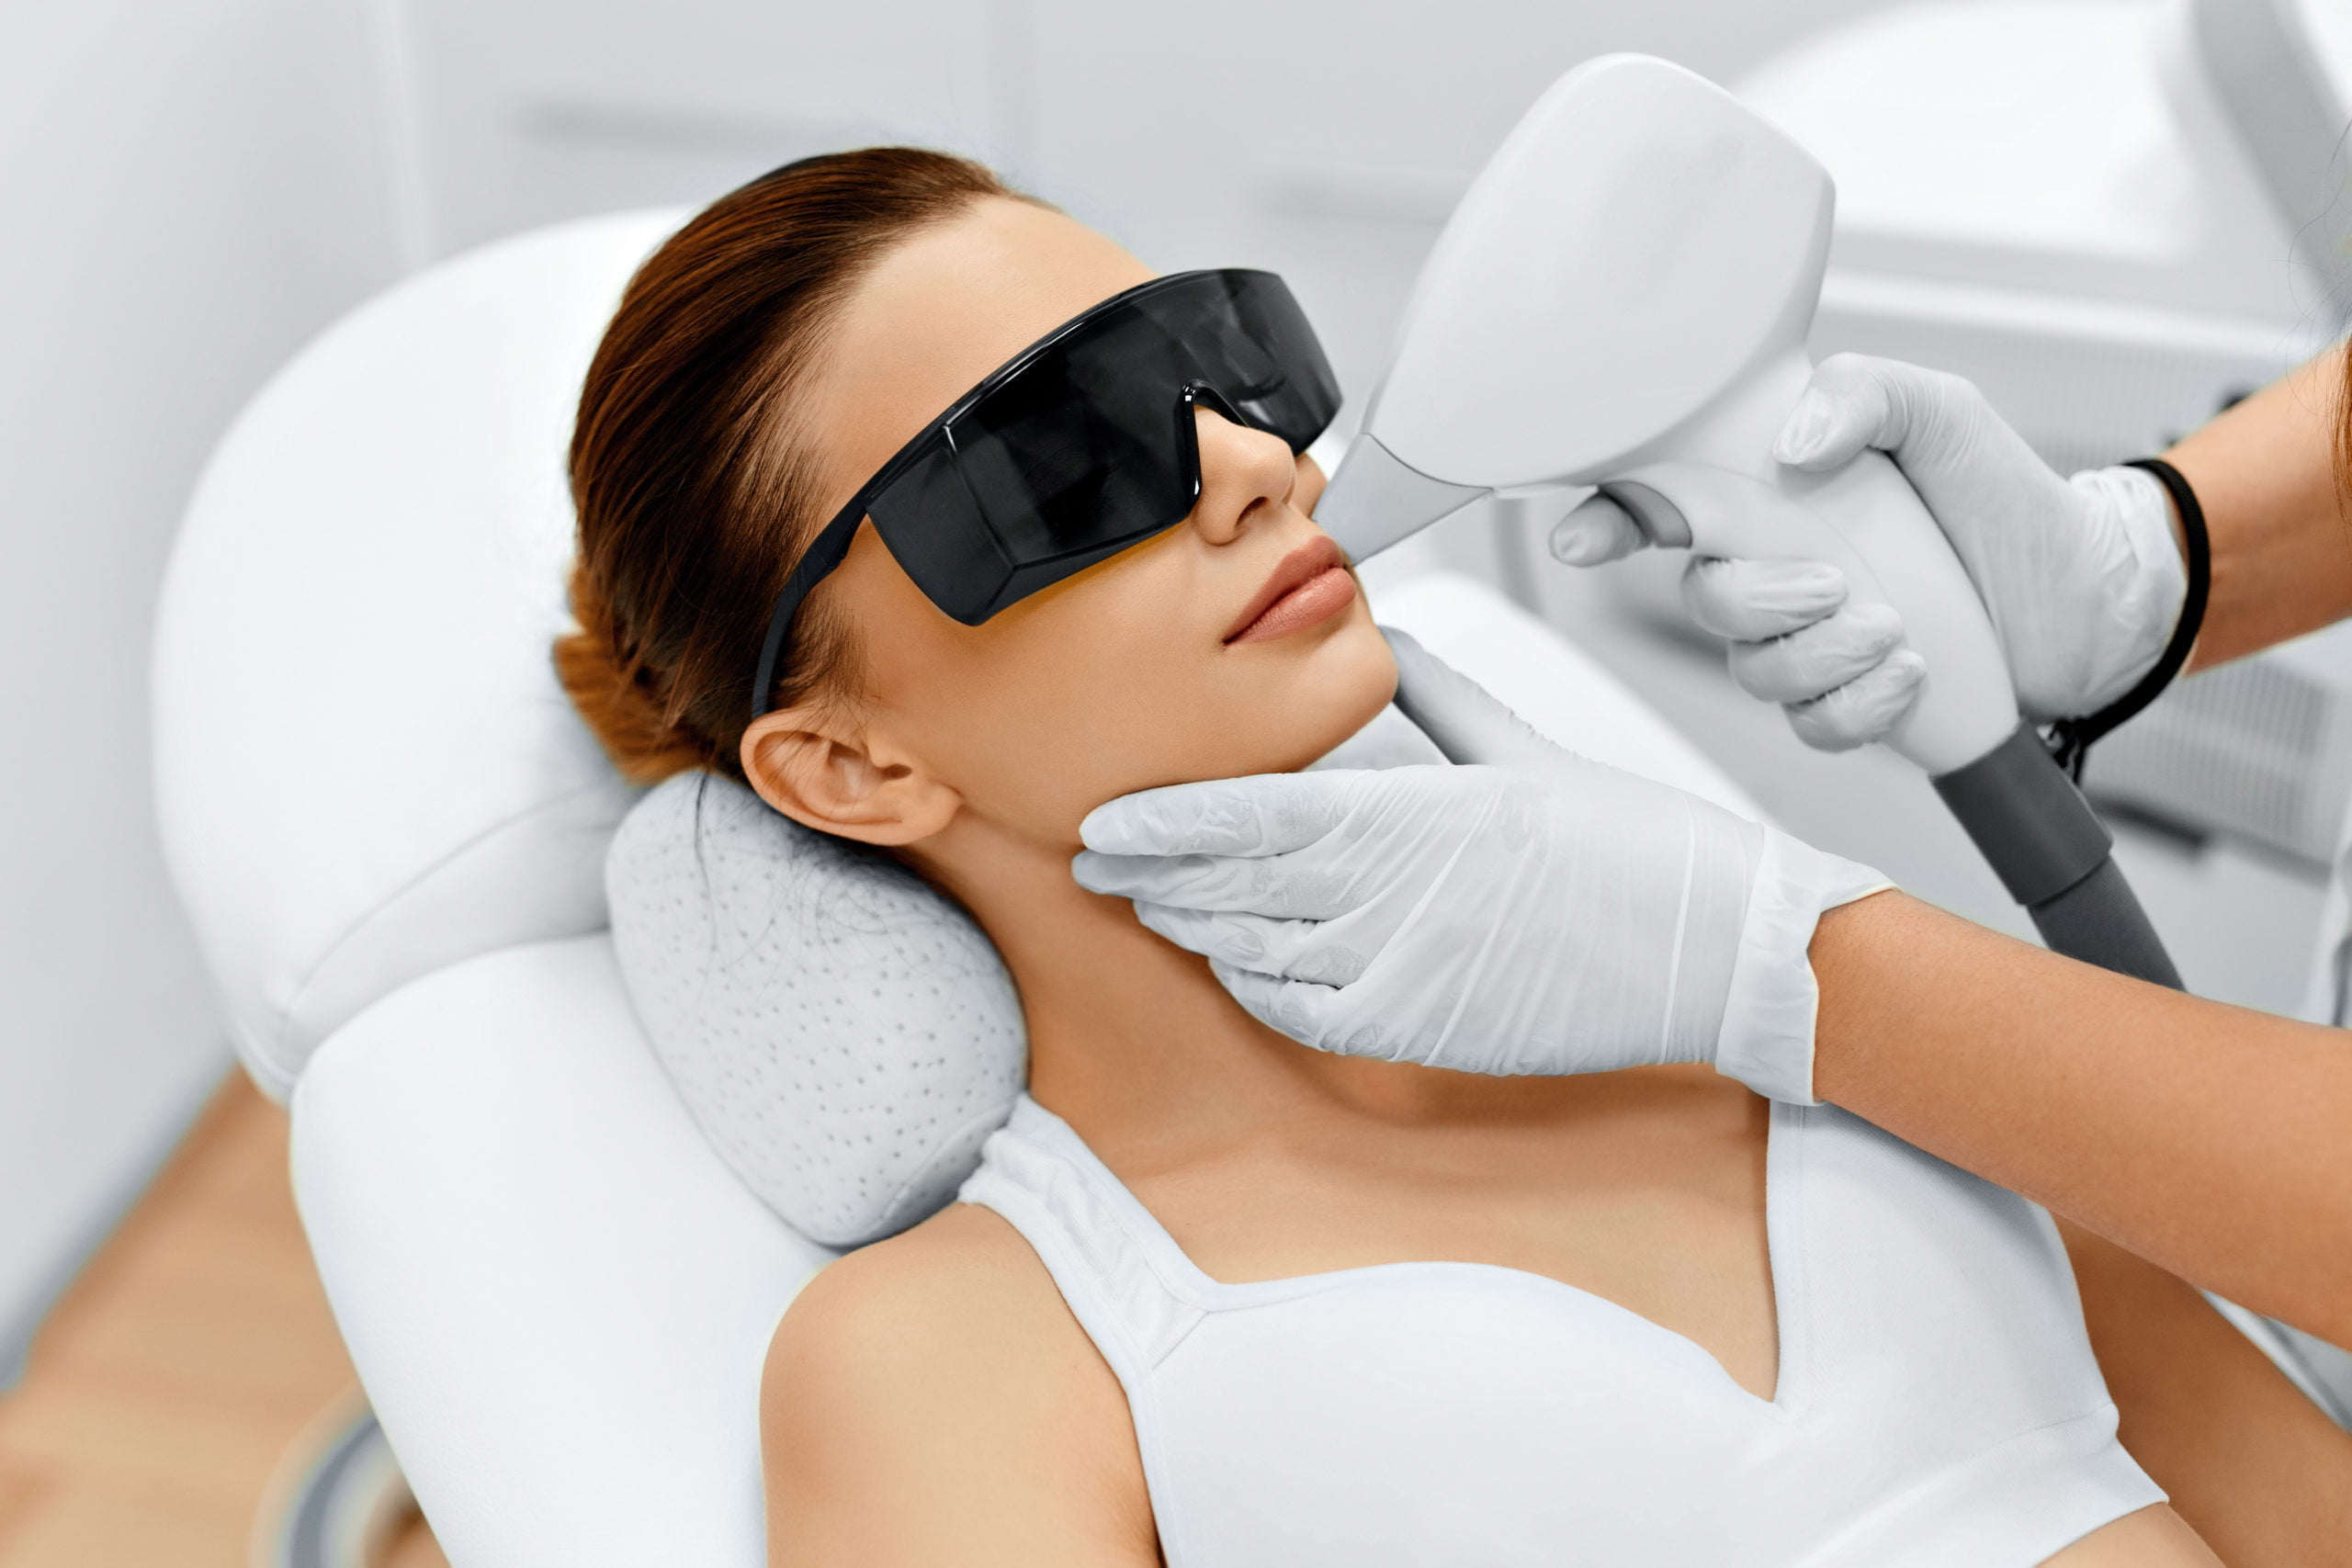 Say Goodbye to Shaving The Advantages of Laser Hair Removal at Mivaglo Aesthetics